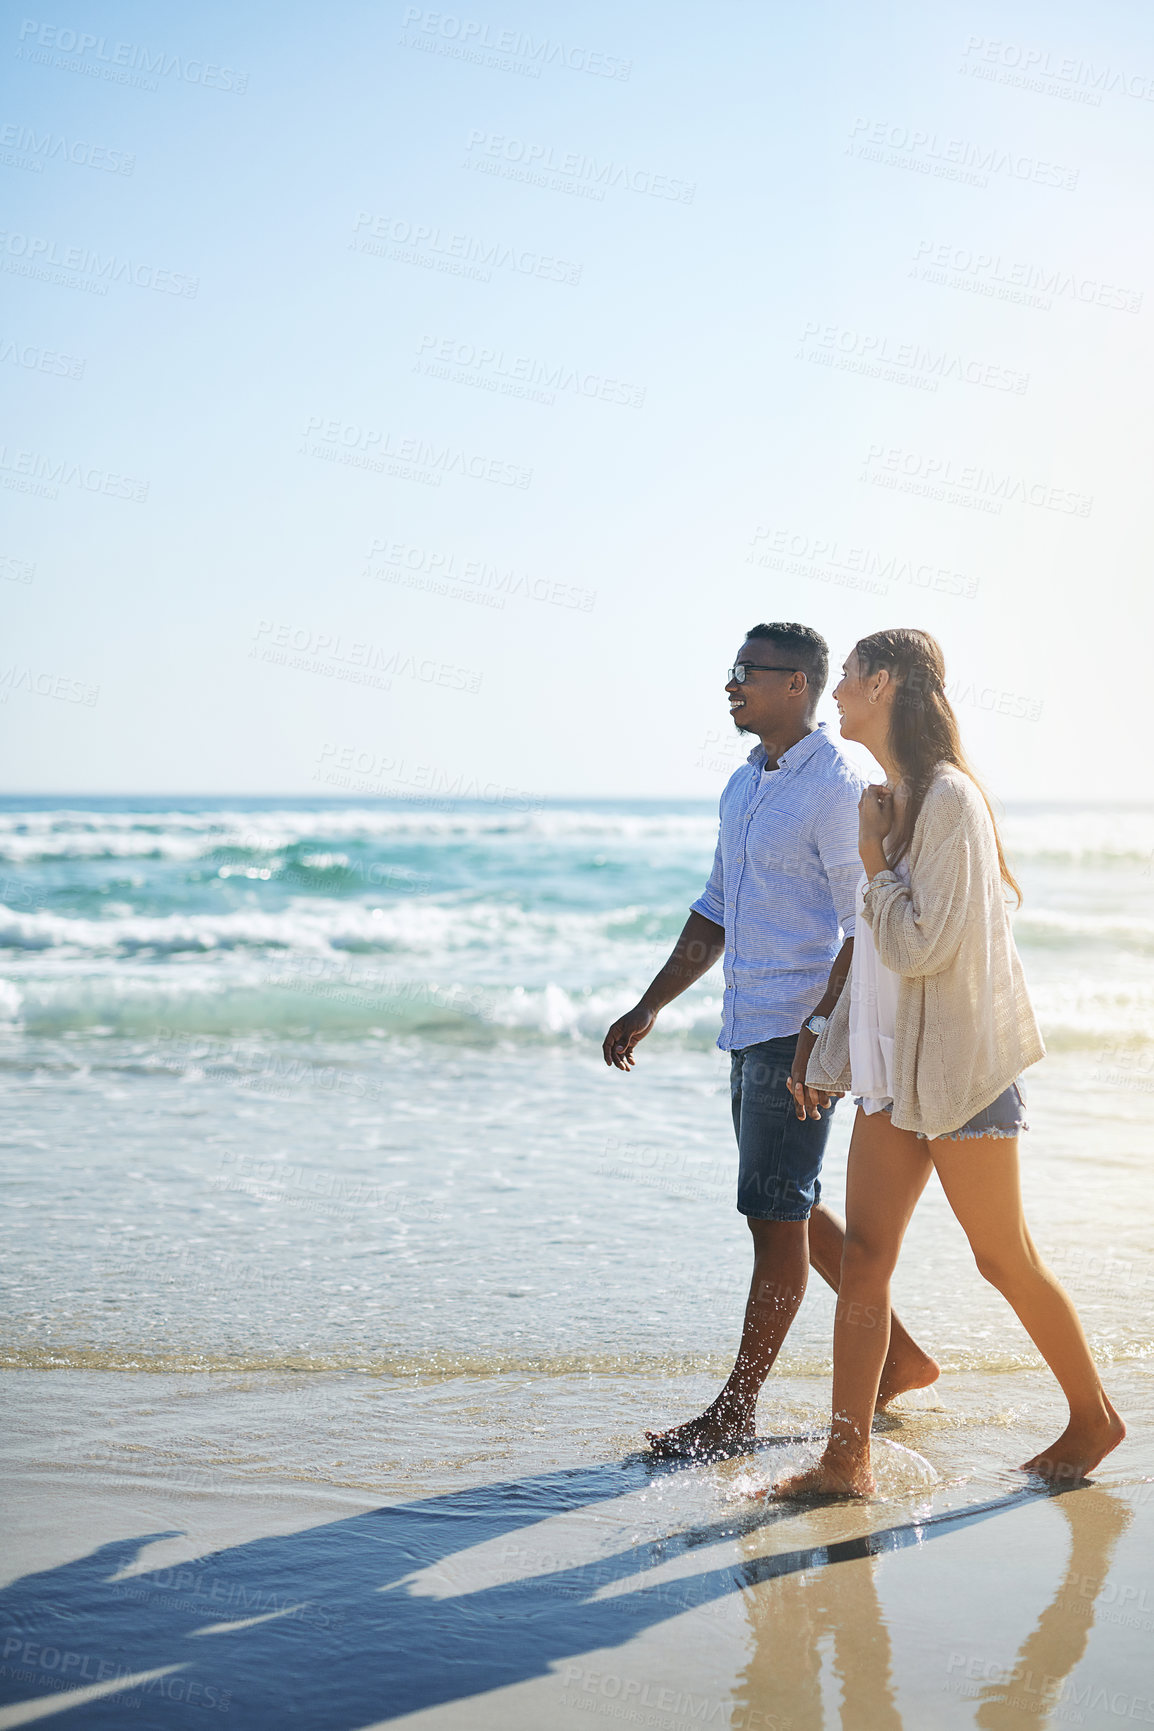 Buy stock photo Shot of a young couple taking a stroll along the beach